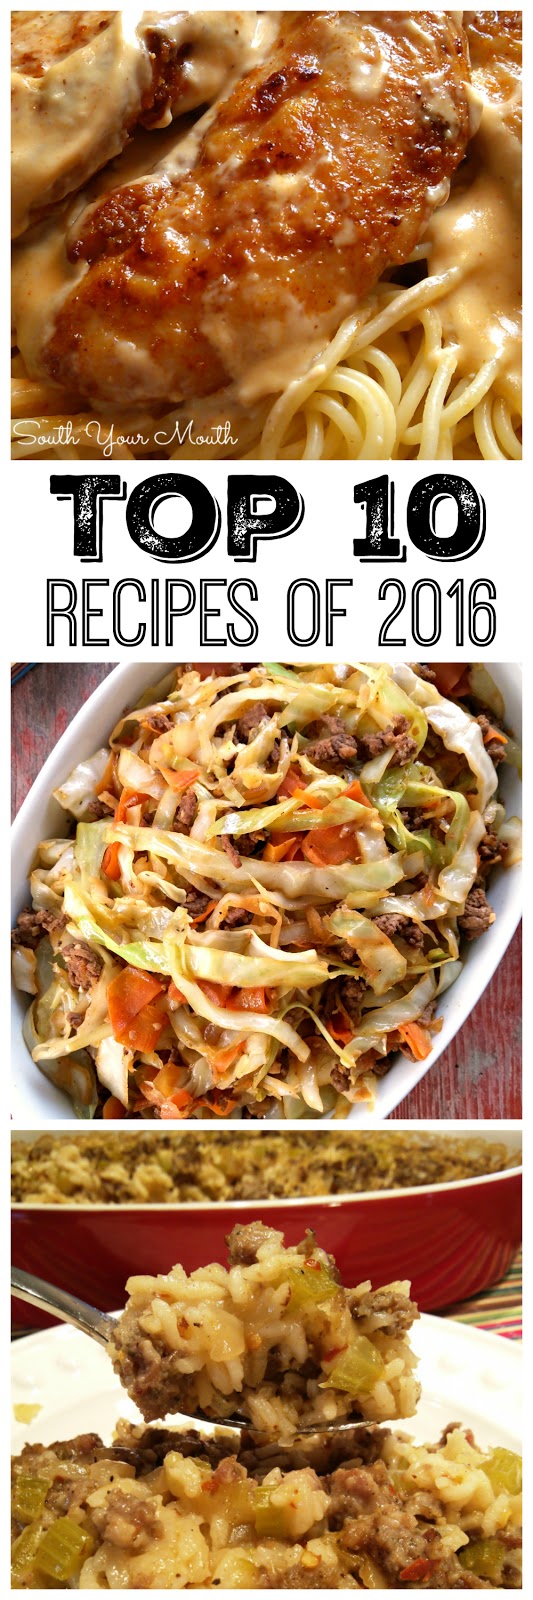 Top 10 recipes of 2016 from your favorite Southern recipe source, South Your Mouth